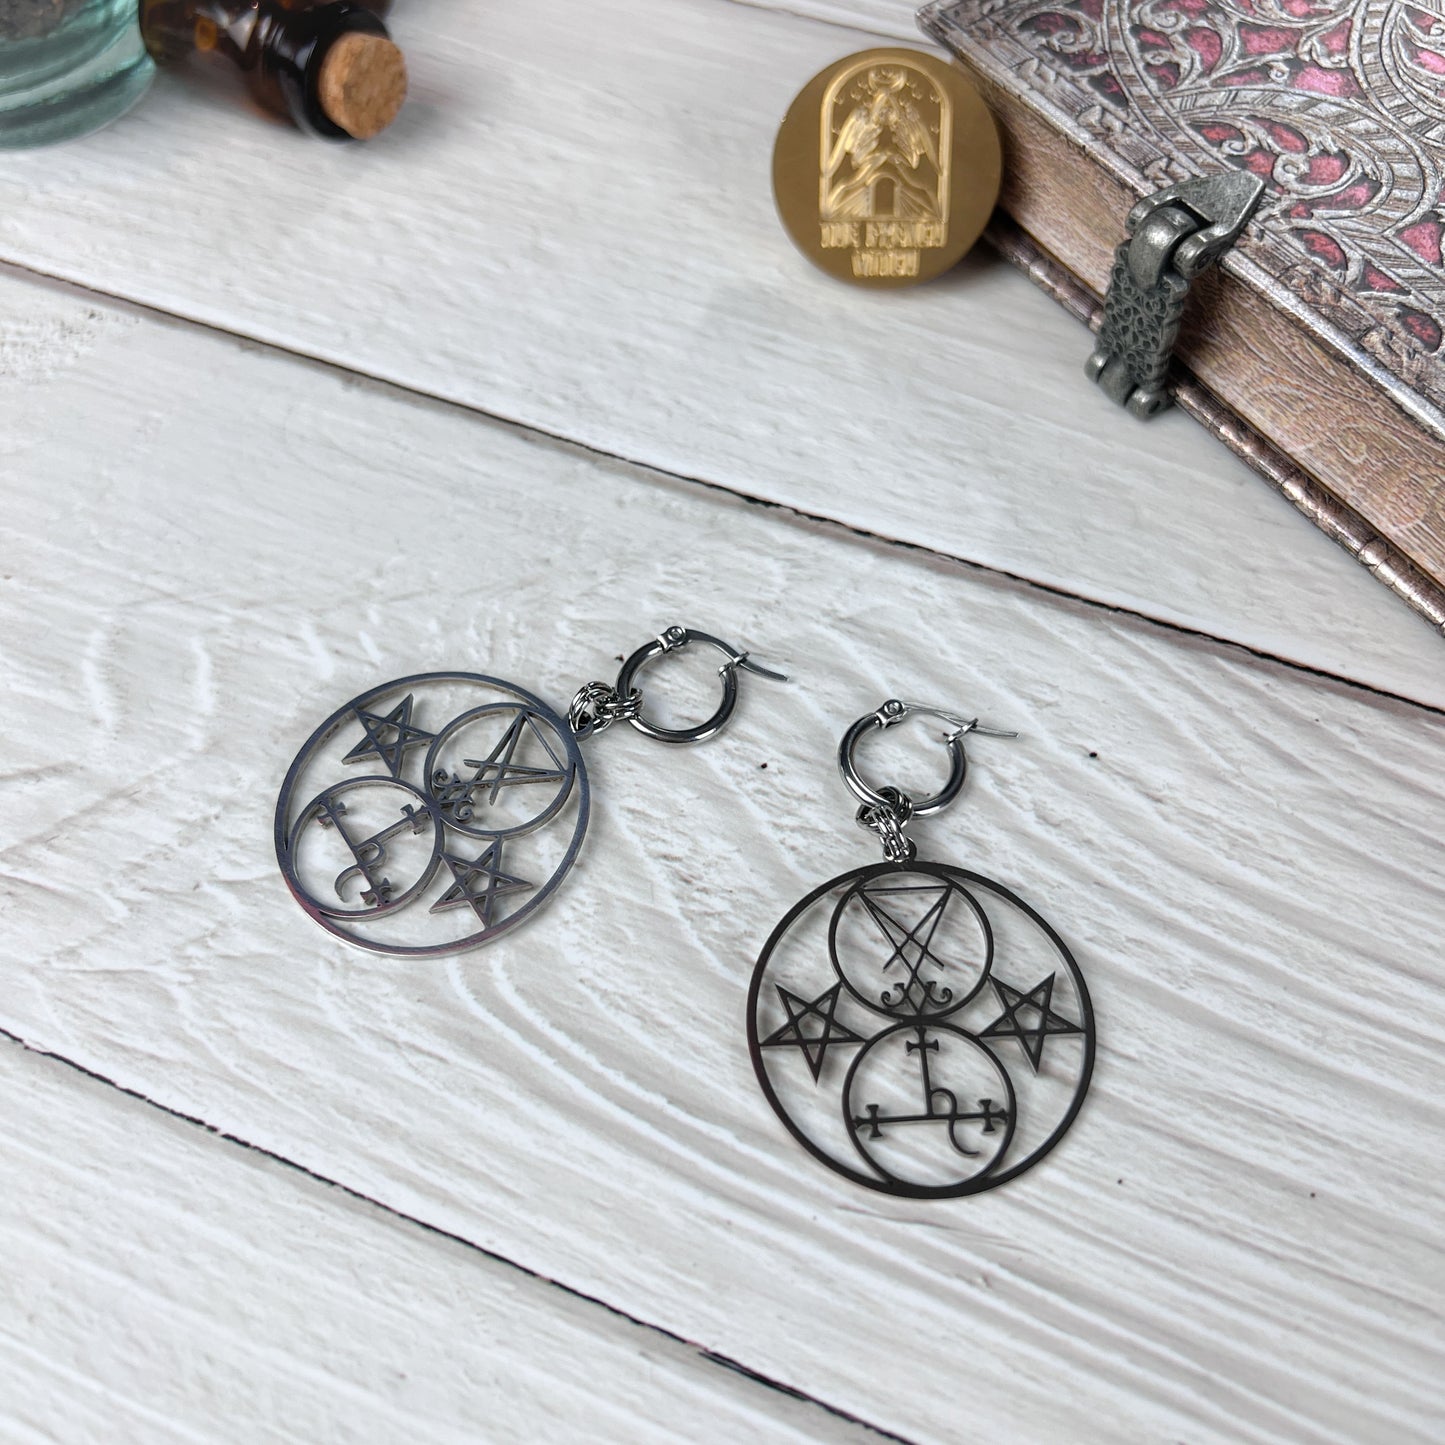 Luciferian earrings, Lilith and Lucifer sigils, inverted pentacle, made of stainless steel Baguette Magick